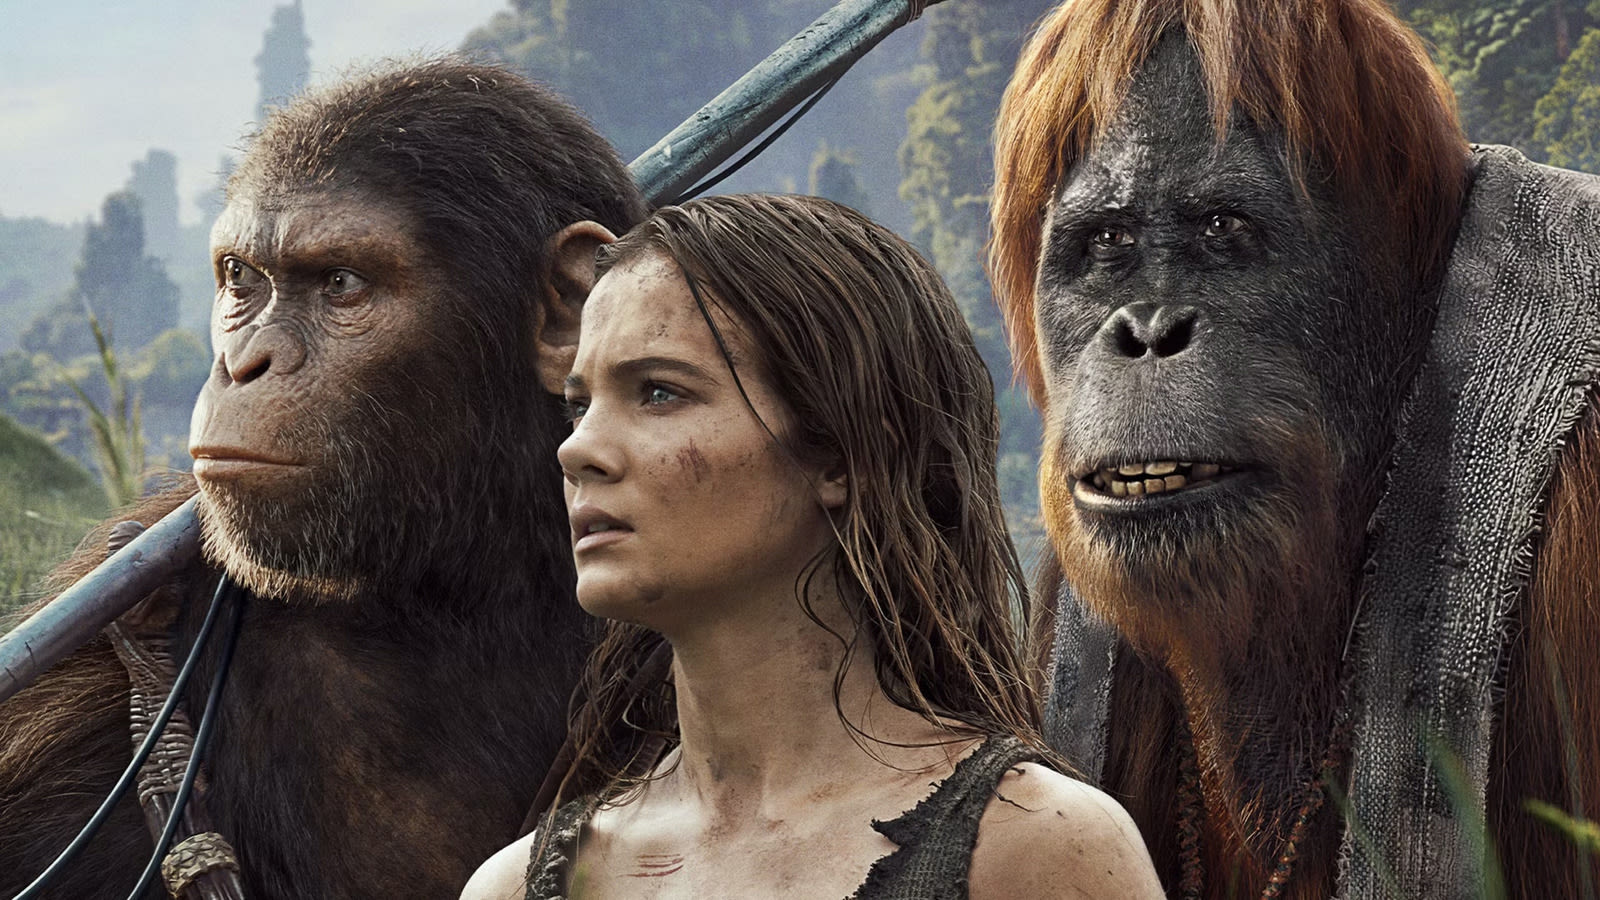 Kingdom Of The Planet Of The Apes Director Says This 'Crucial' Relationship Will Inform A Possible Sequel [Exclusive...